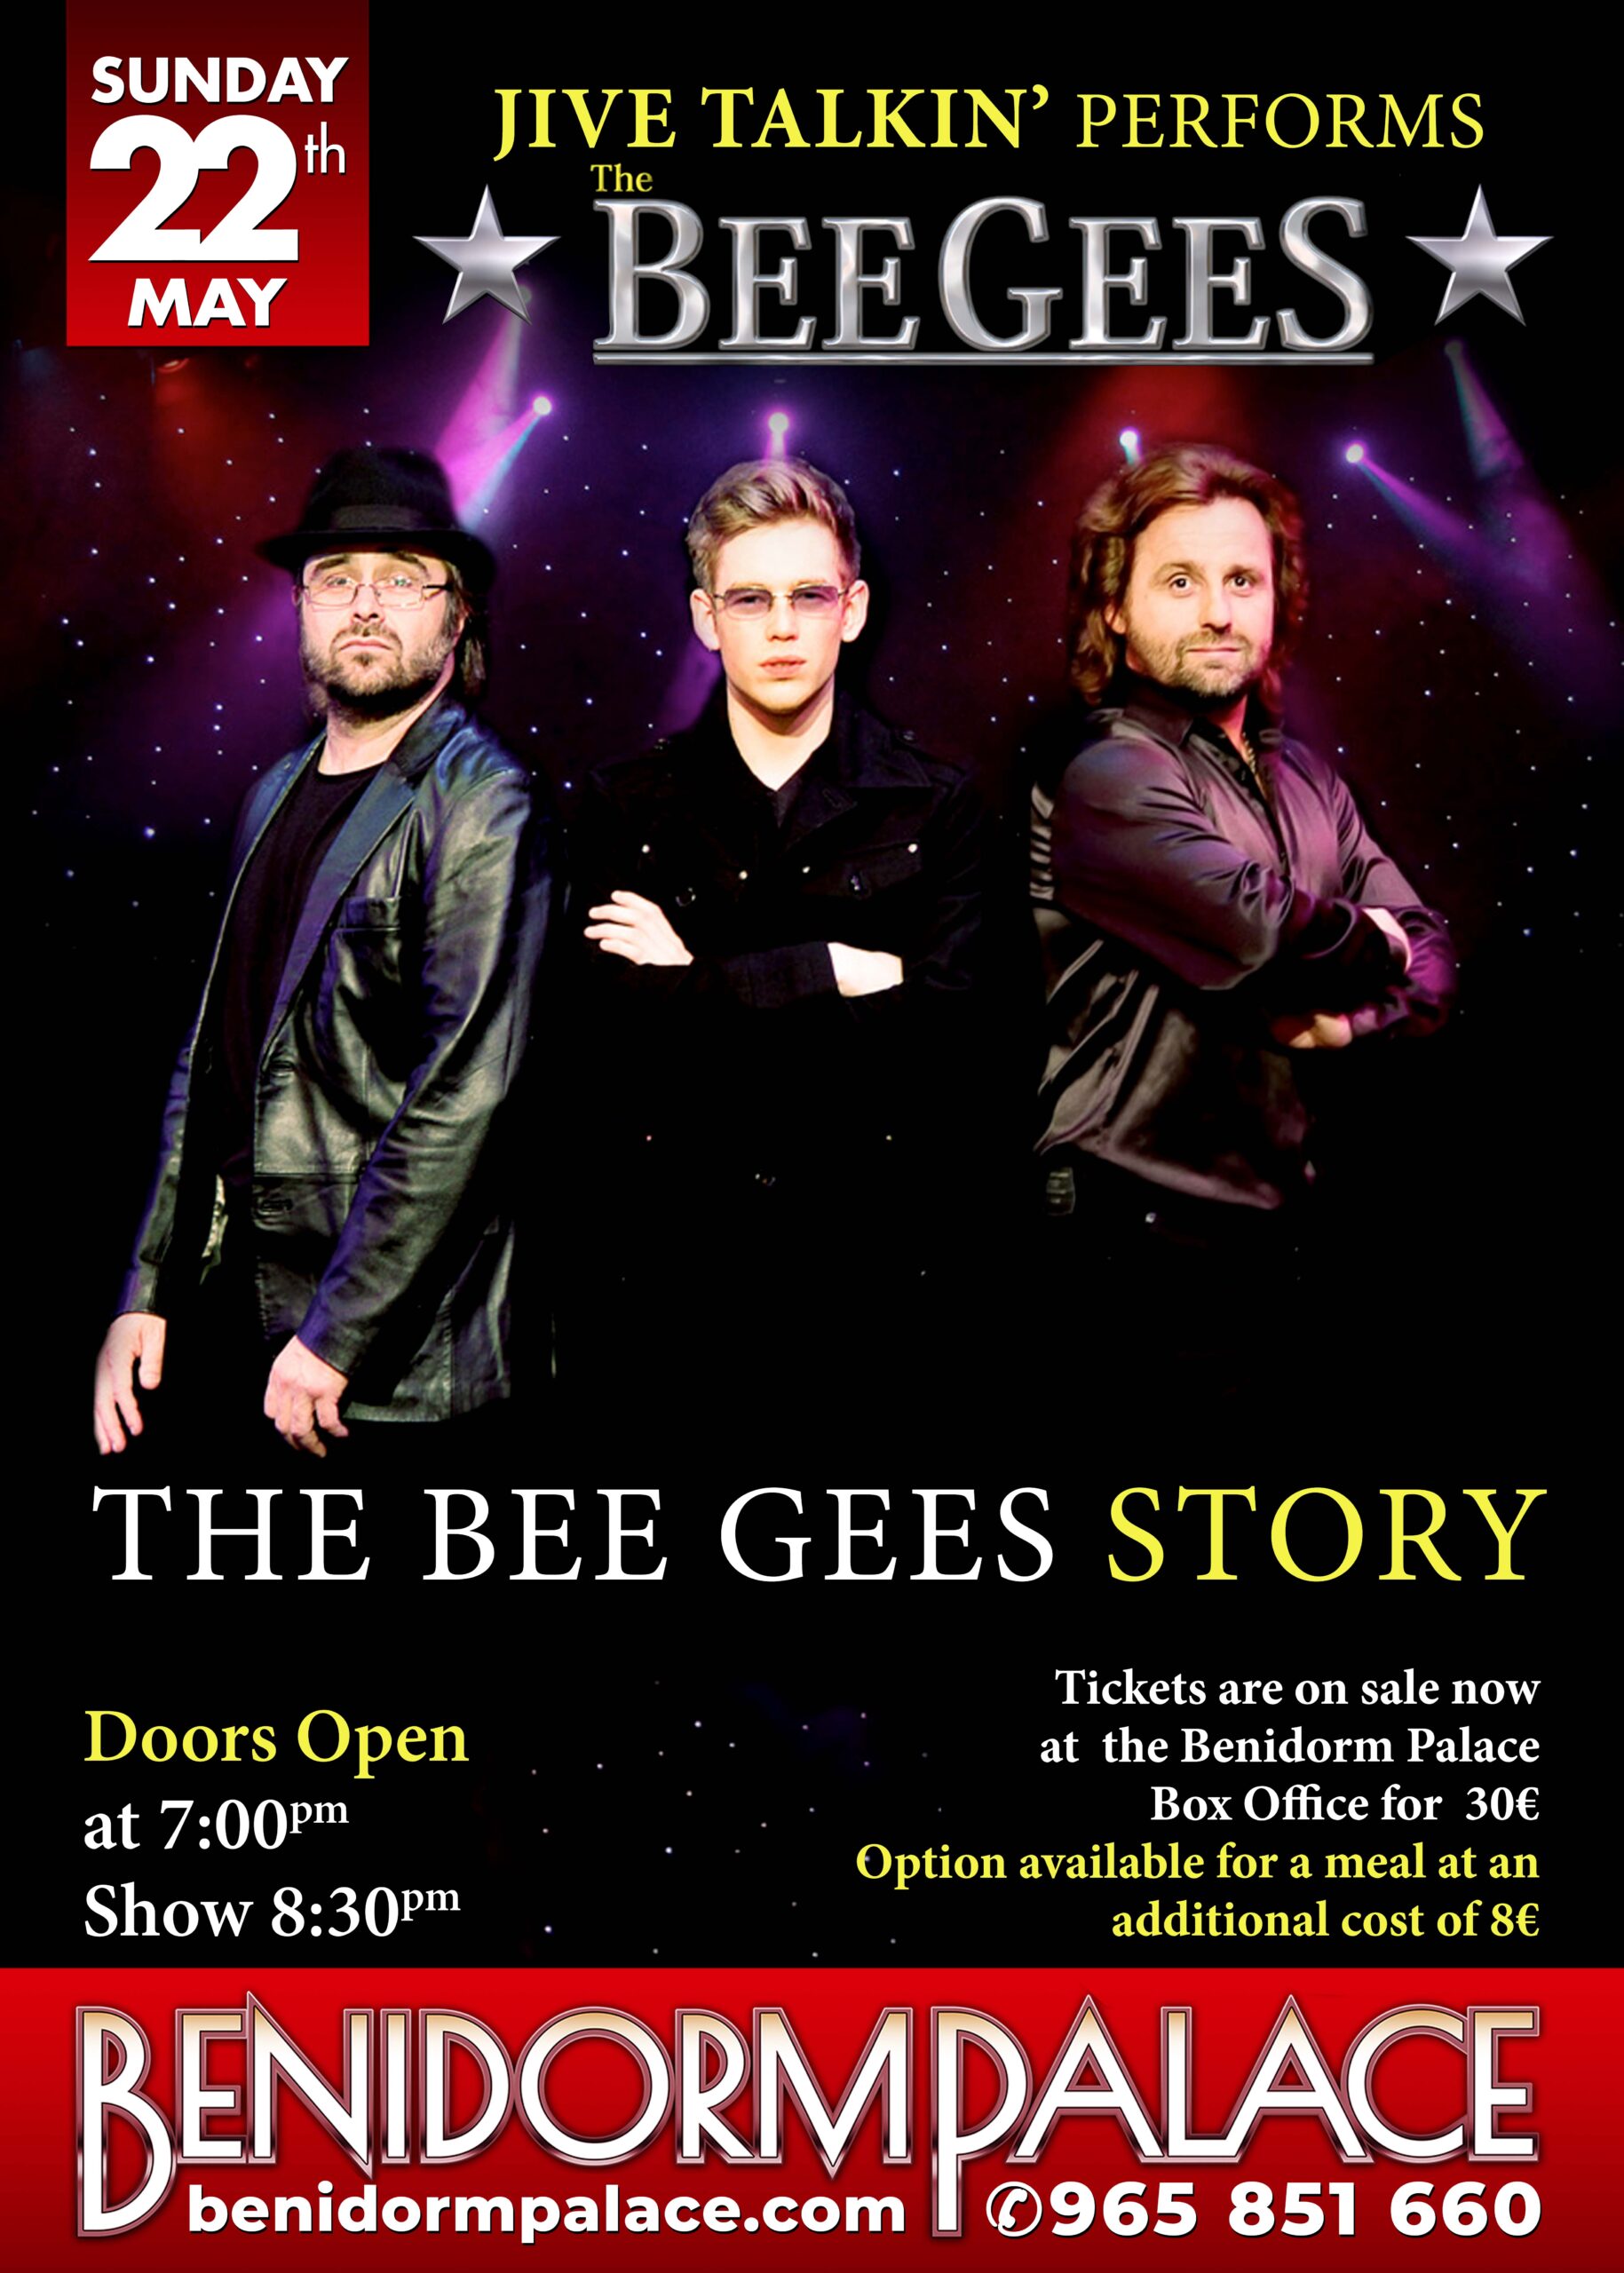 Cartel The Bee Gees Benidorm Palace 100x140cm 2021800 scaled